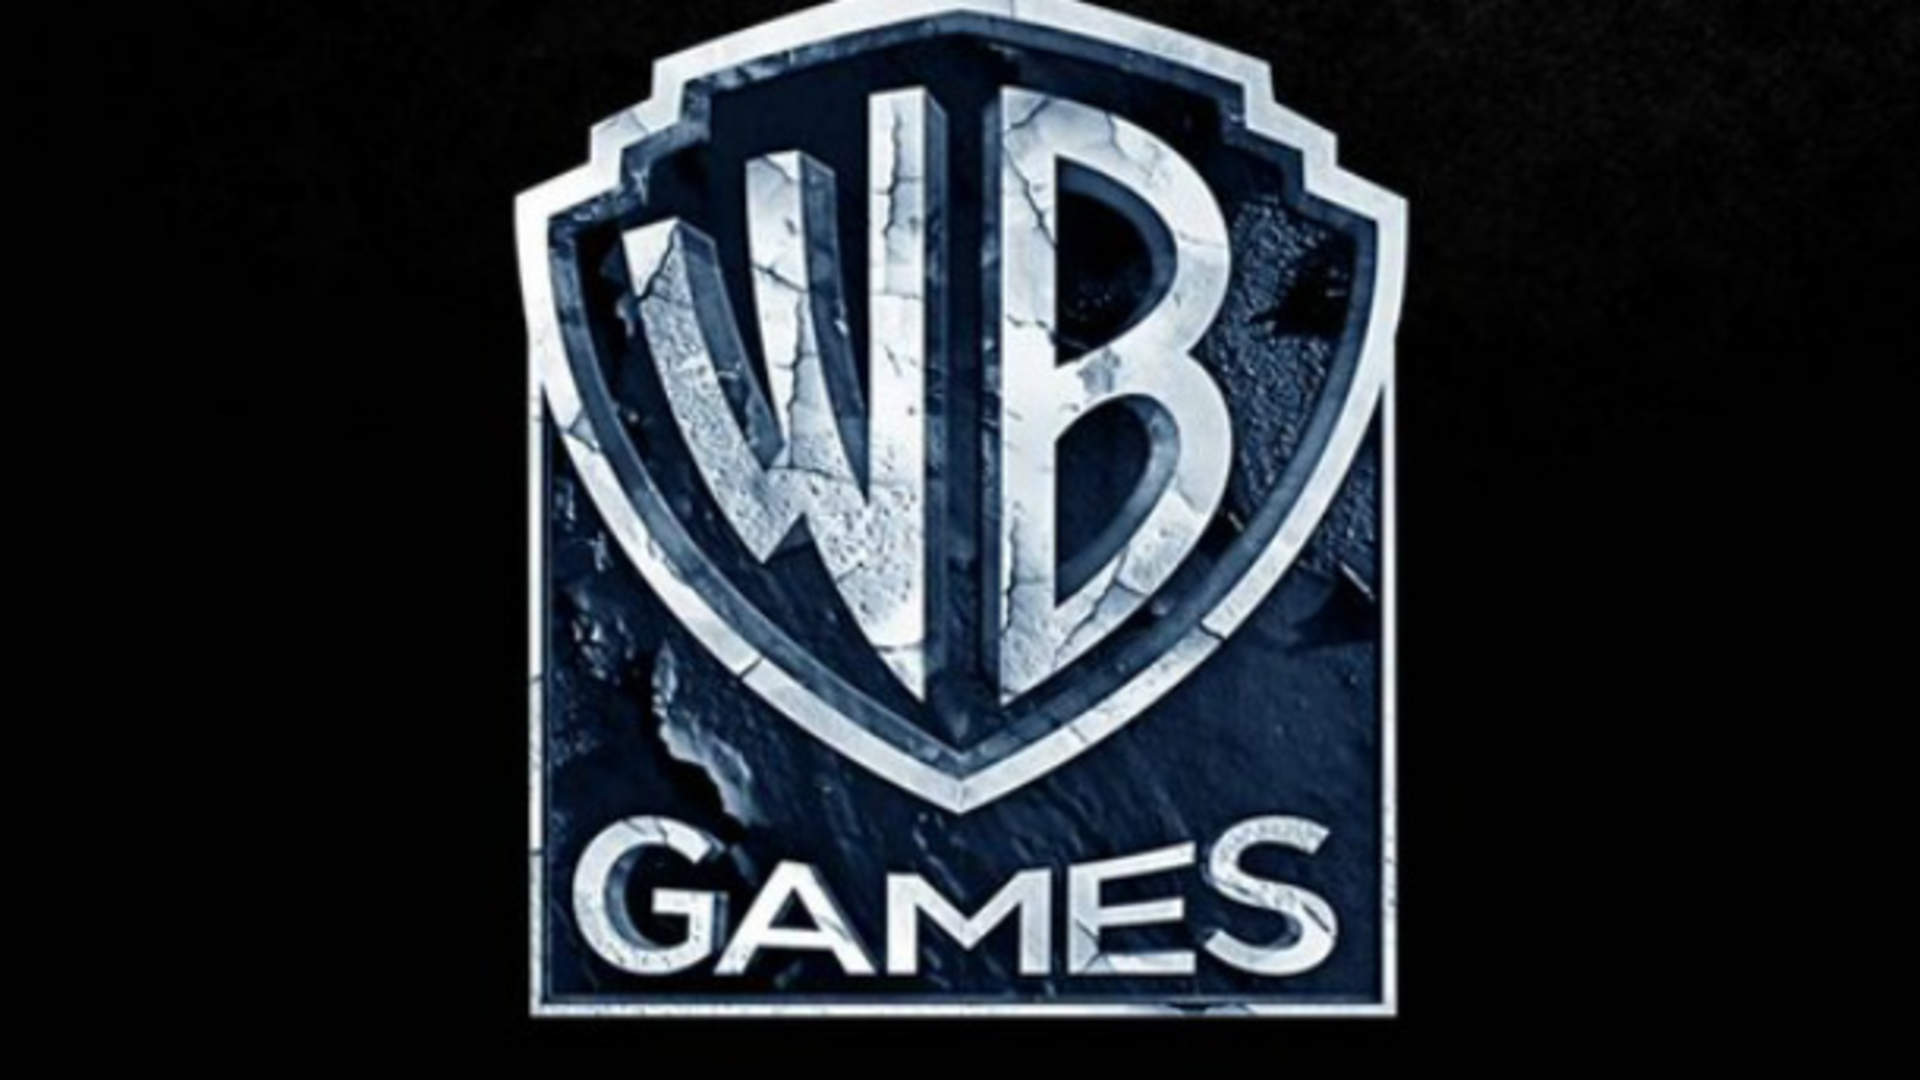 WB Games May Get Split Up Due to AT&T/Discovery Deal